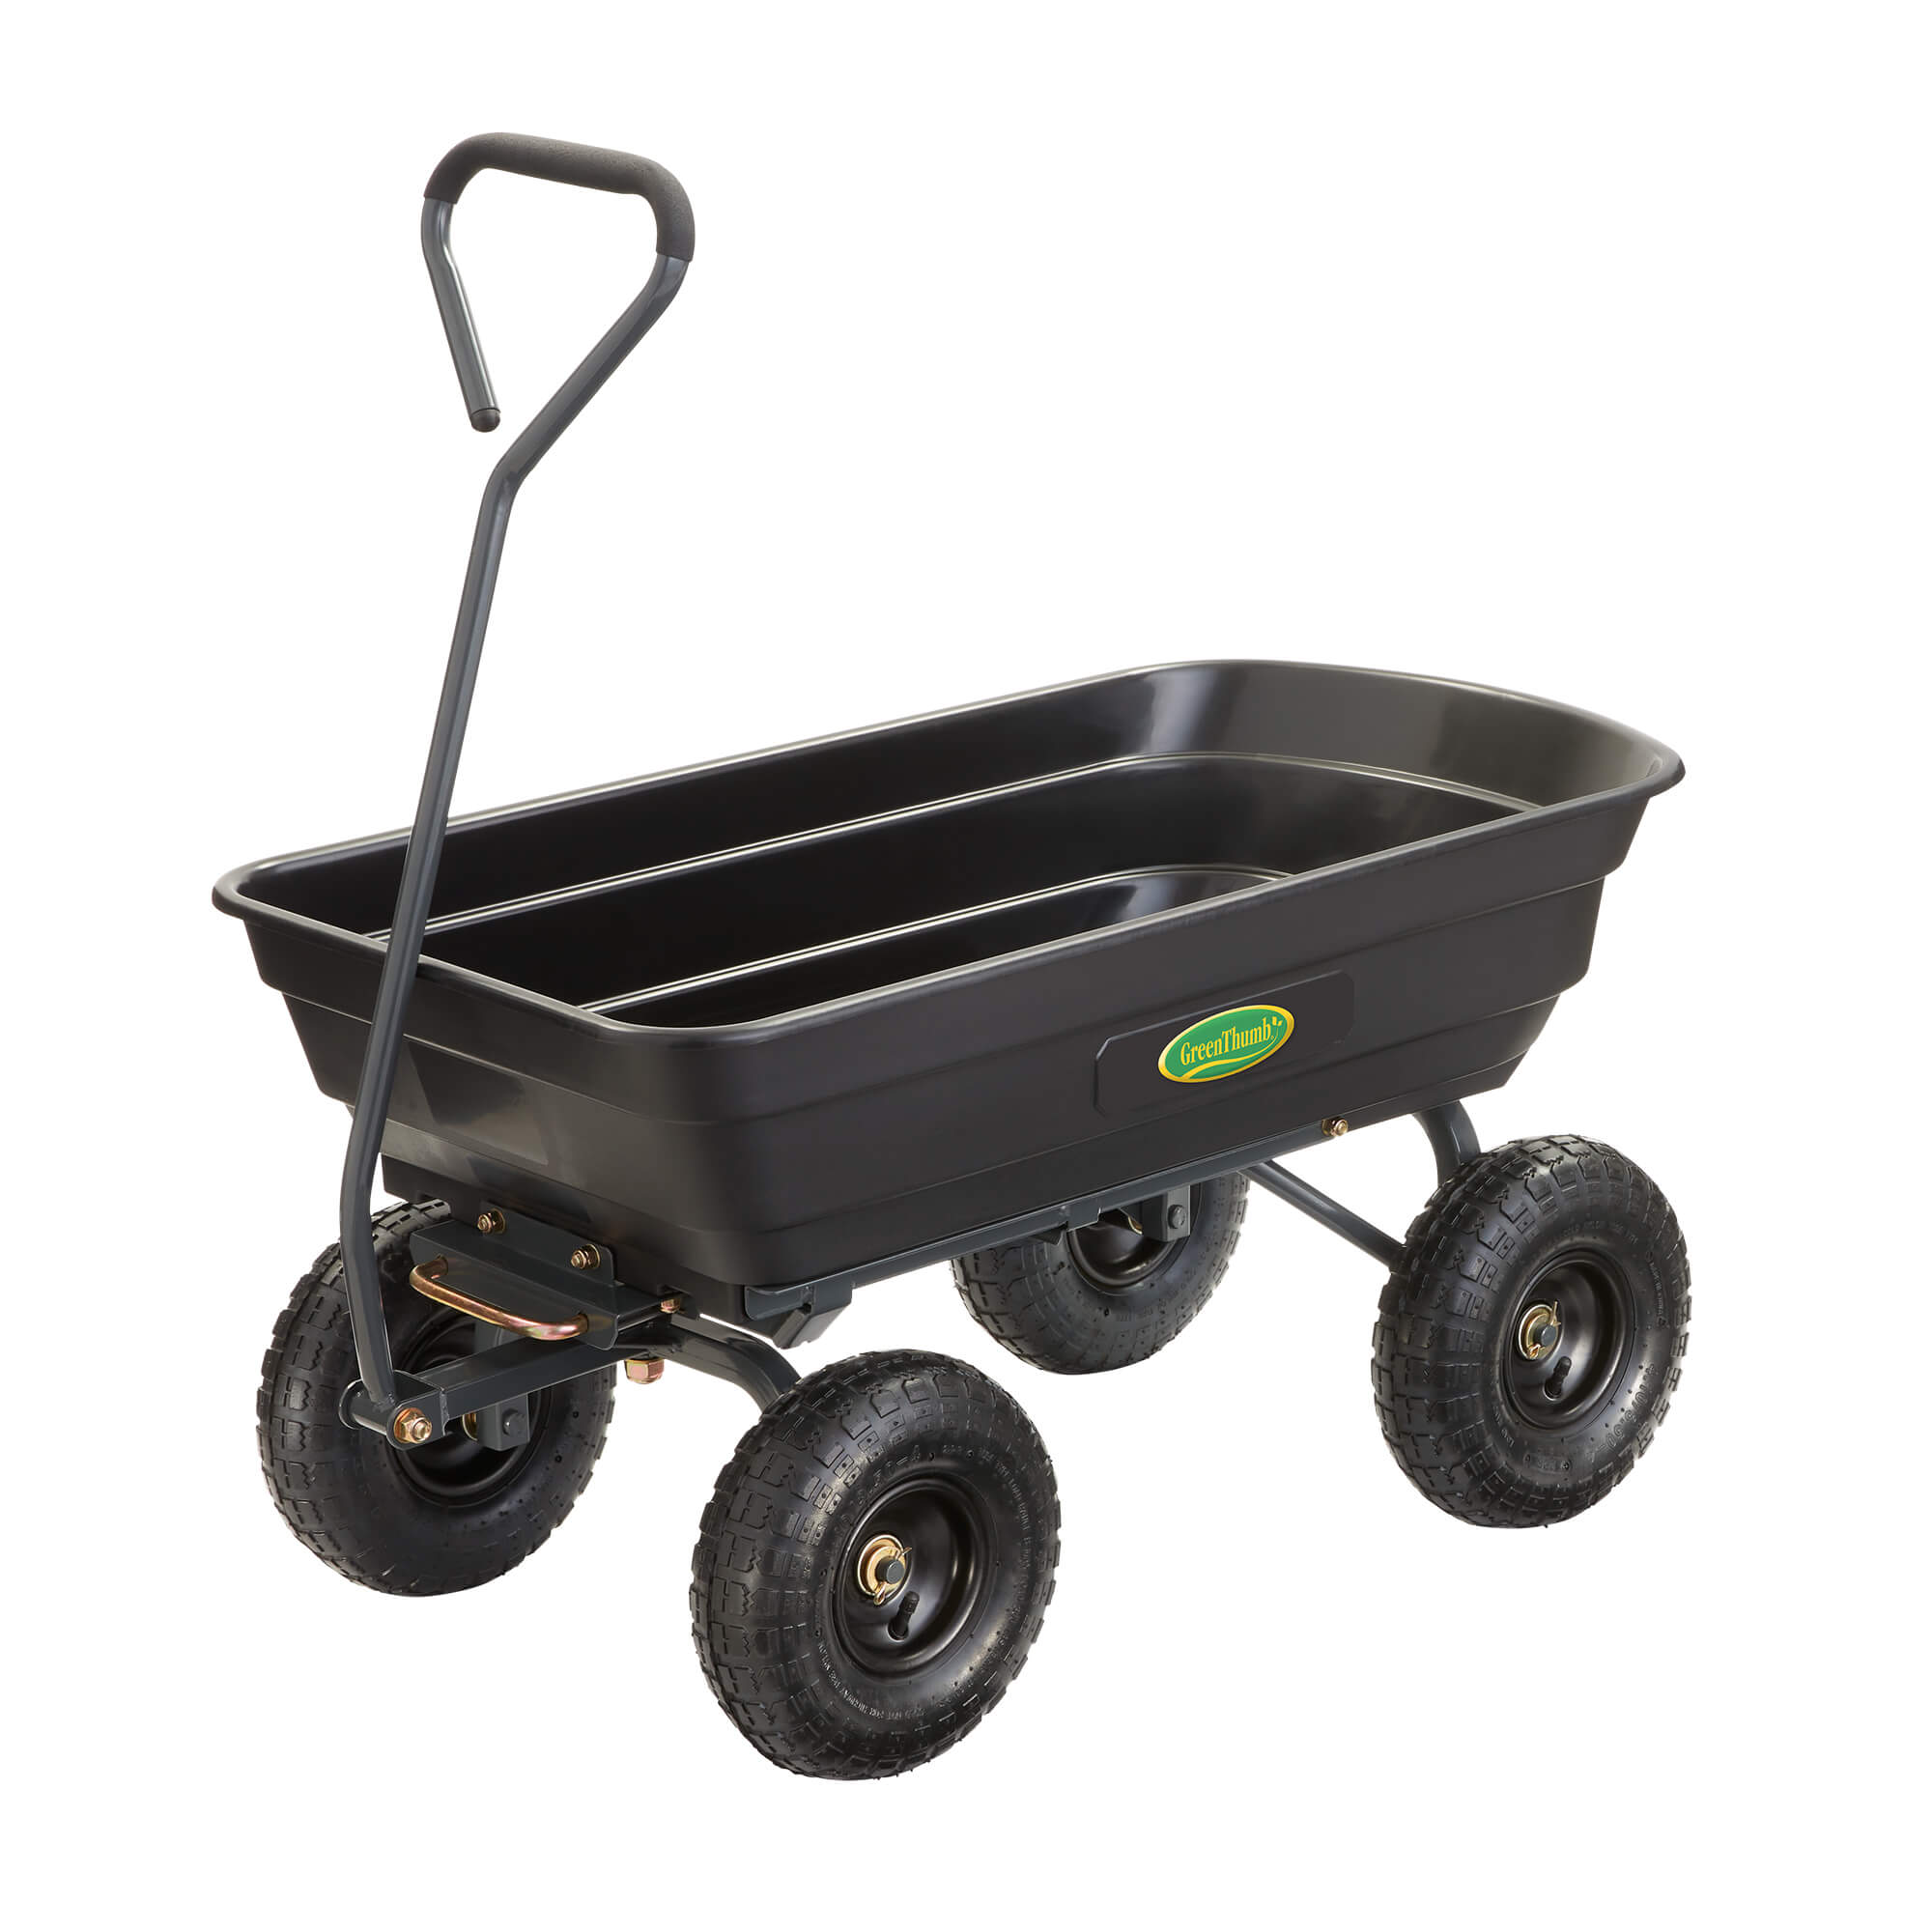 Strongway Cart Replacement Parts & Products